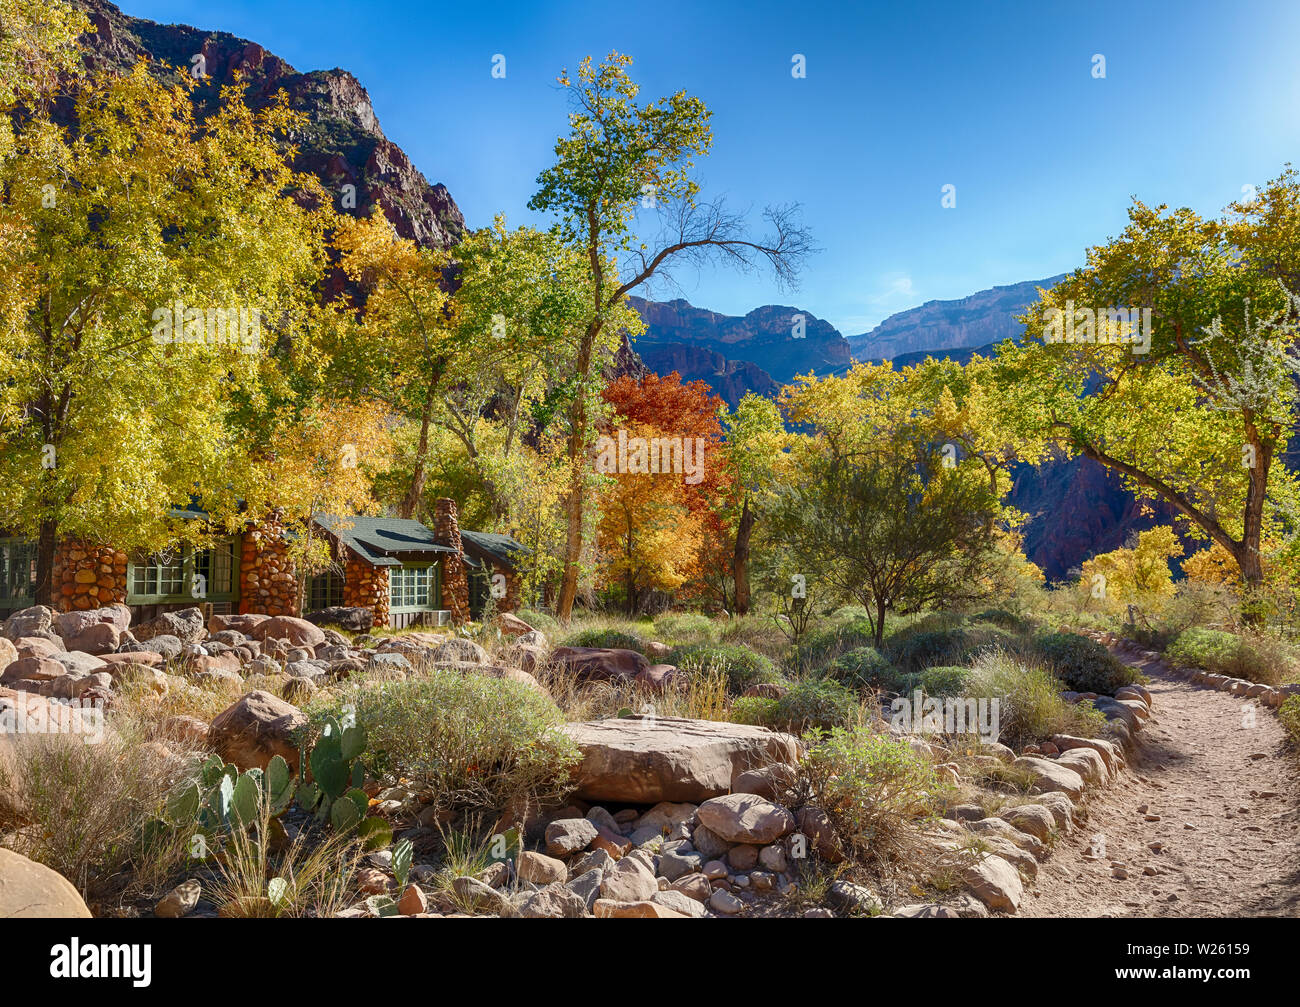 The Phantom Ranch is a tourist destination which sits near the Colorado River at the bottom of the Grand Canyon. Stock Photo